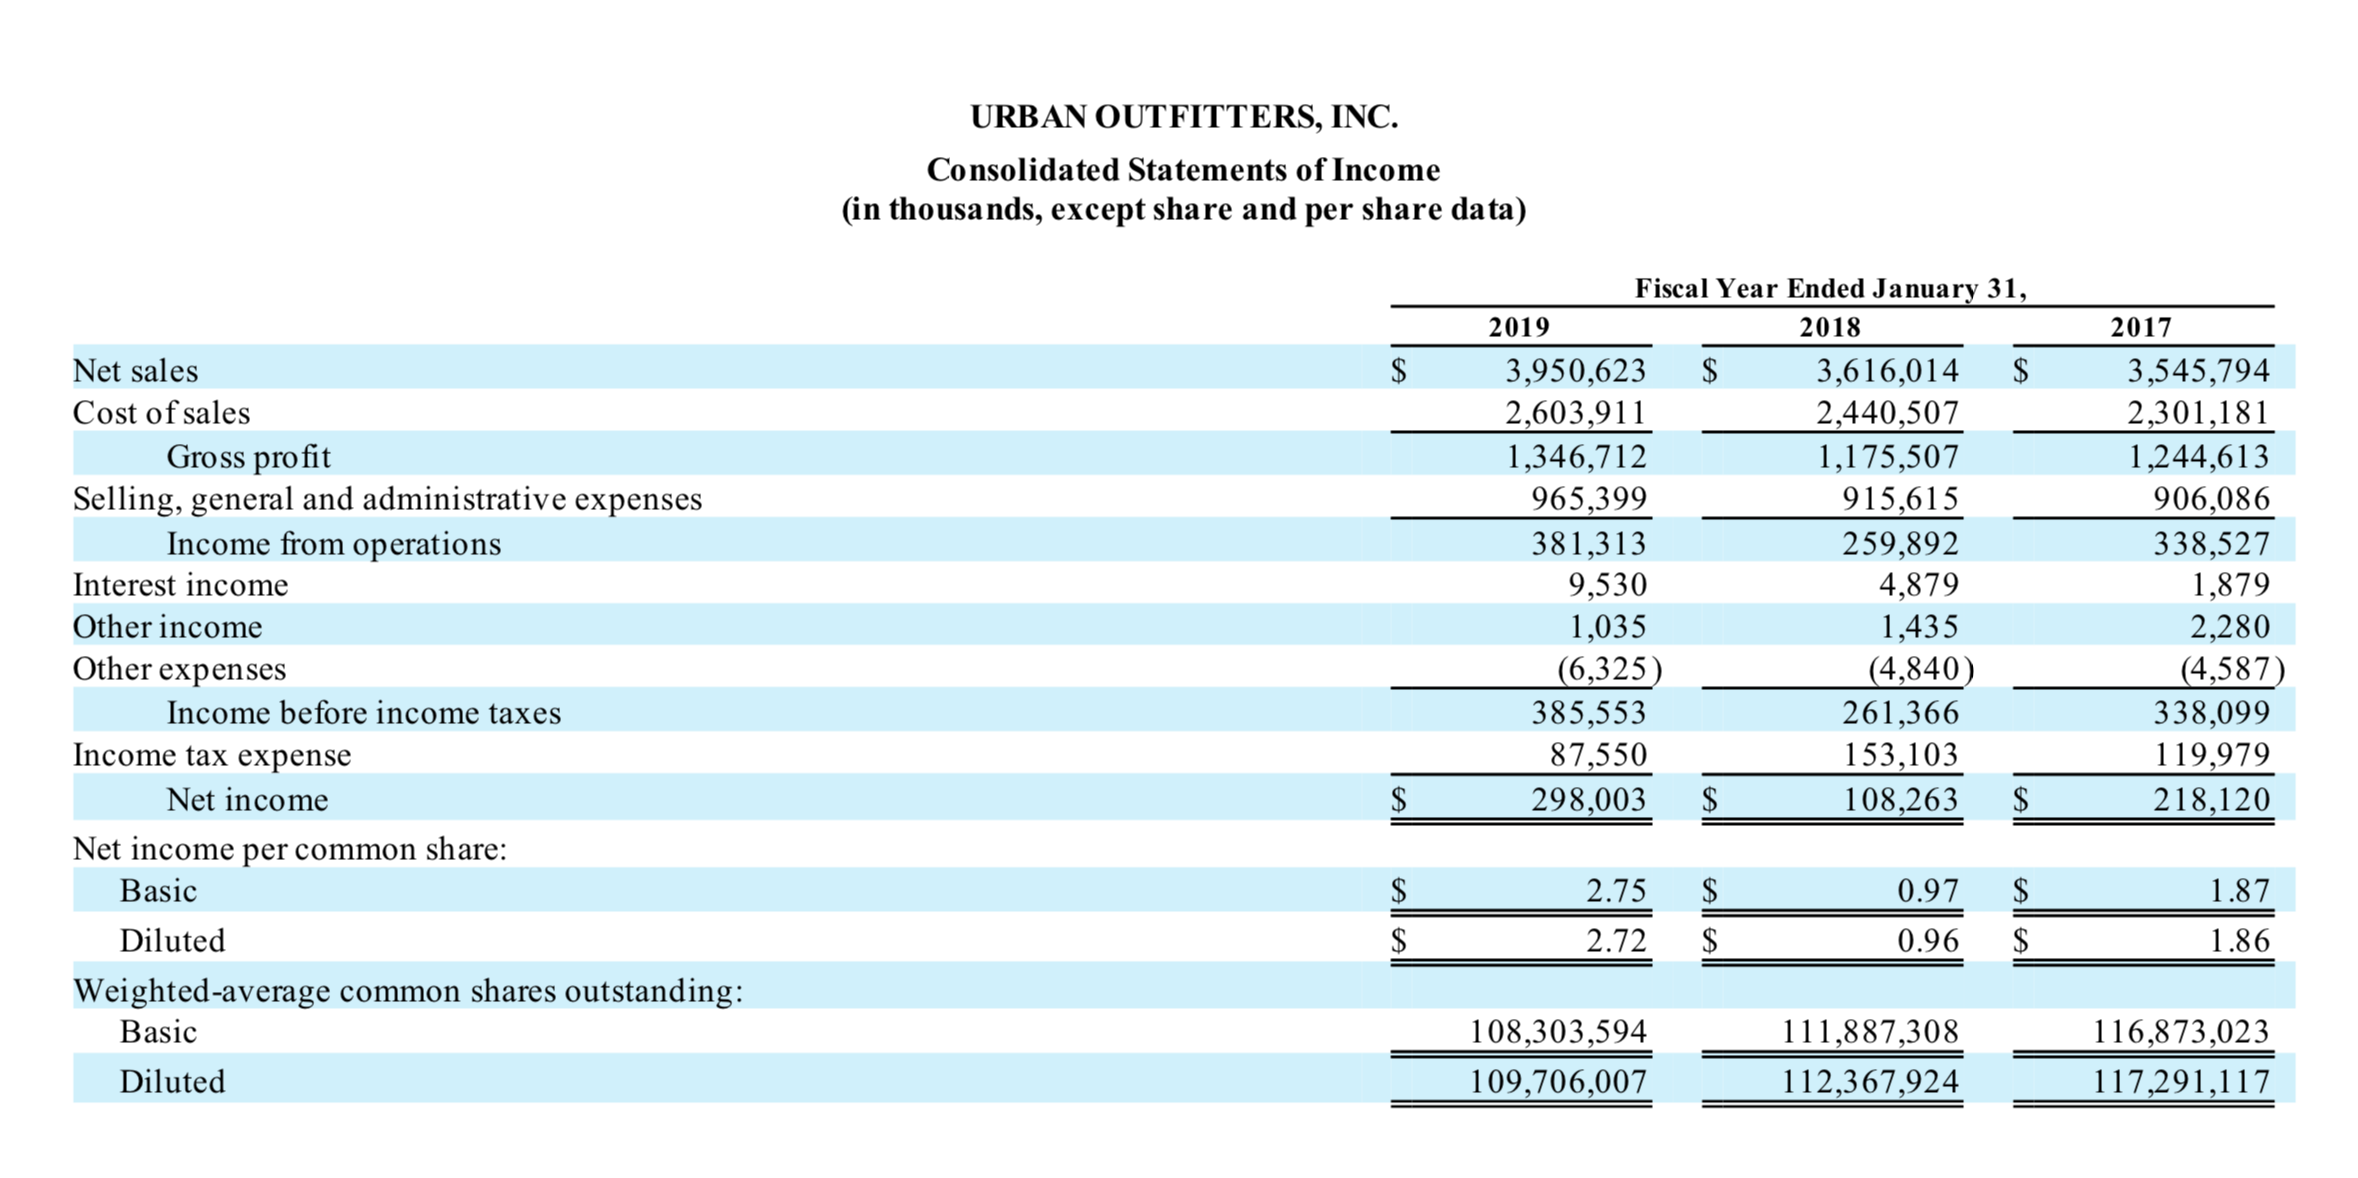 URBAN OUTFITTERS, INC.
Consolidated Statements of Income
(in thousands, except share and per share data)
Fiscal Year Ended January 31,
2019
2018
2017
3,616,014
2,440,507
1,175,507
915,615
259,892
3,545,794
2,301,181
1,244,613
906,086
Net sales
3,950,623
Cost of sales
Gross profit
Selling, general and administrative expenses
Income from operations
2,603,911
1,346,712
965,399
381,313
9,530
1,035
338,527
1,879
2,280
Interest income
4,879
1,435
Other income
Other expenses
(6,325)
385,553
(4,840)
261,366
(4,587)
338,099
Income before income taxes
Income tax expense
87,550
298,003
153,103
108,263
119,979
218,120
Net income
Net income per common share:
Basic
2.75
0.97
1.87
Diluted
2.72
0.96
1.86
Weighted-average common shares outstanding:
Basic
108,303,594
111,887,308
116,873,023
Diluted
109,706,007
112,367,924
117,291,117
